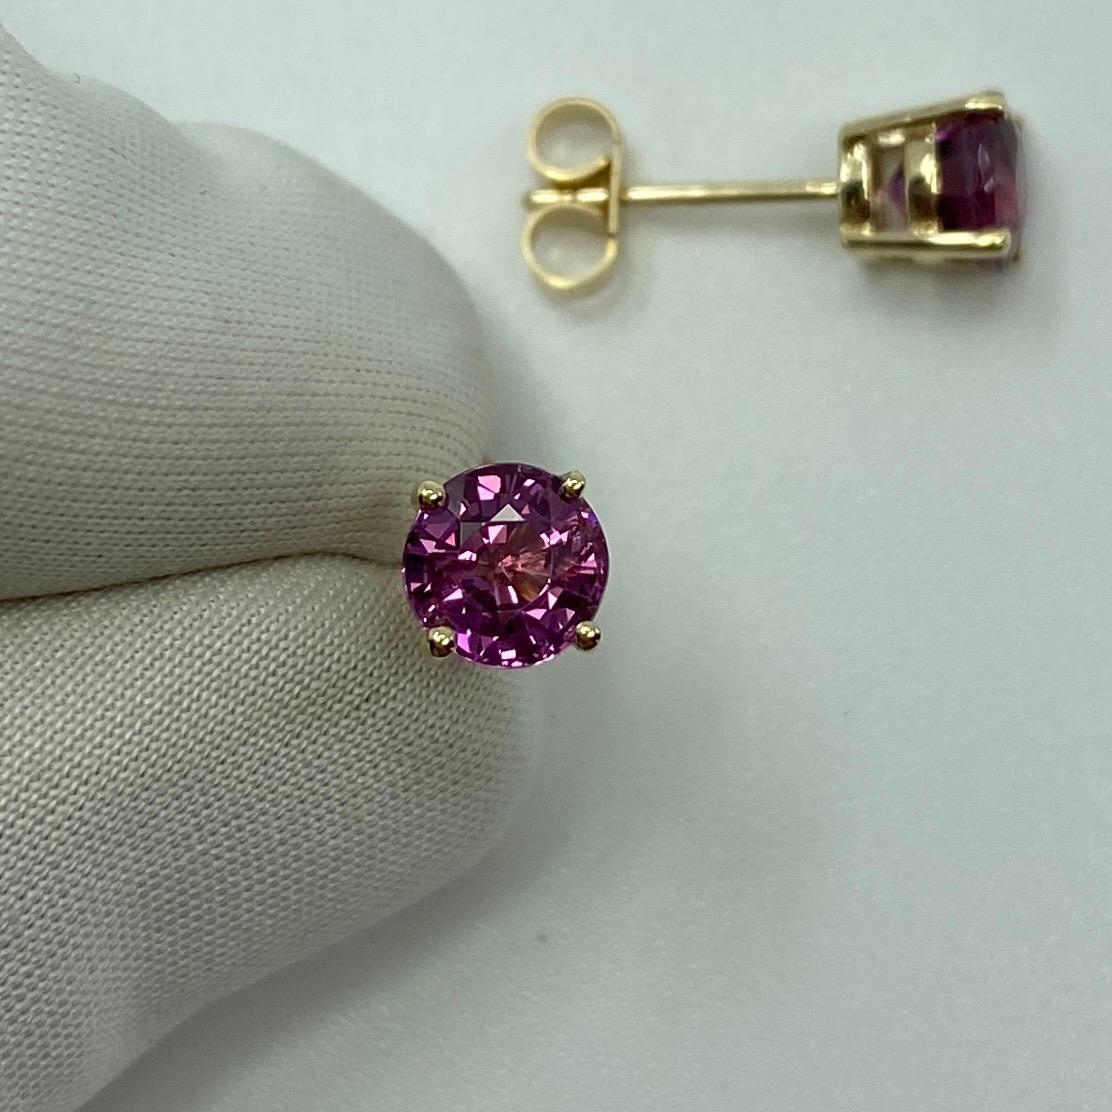 Vivid Pink Purple 2.50 Carat Rhodolite Garnet Yellow Gold Earring Studs.

Beautiful 6 mm matching pair of round garnets with vivid colour, excellent clarity and an excellent round brilliant cut.

Set in fine 9k yellow gold studs with butterfly